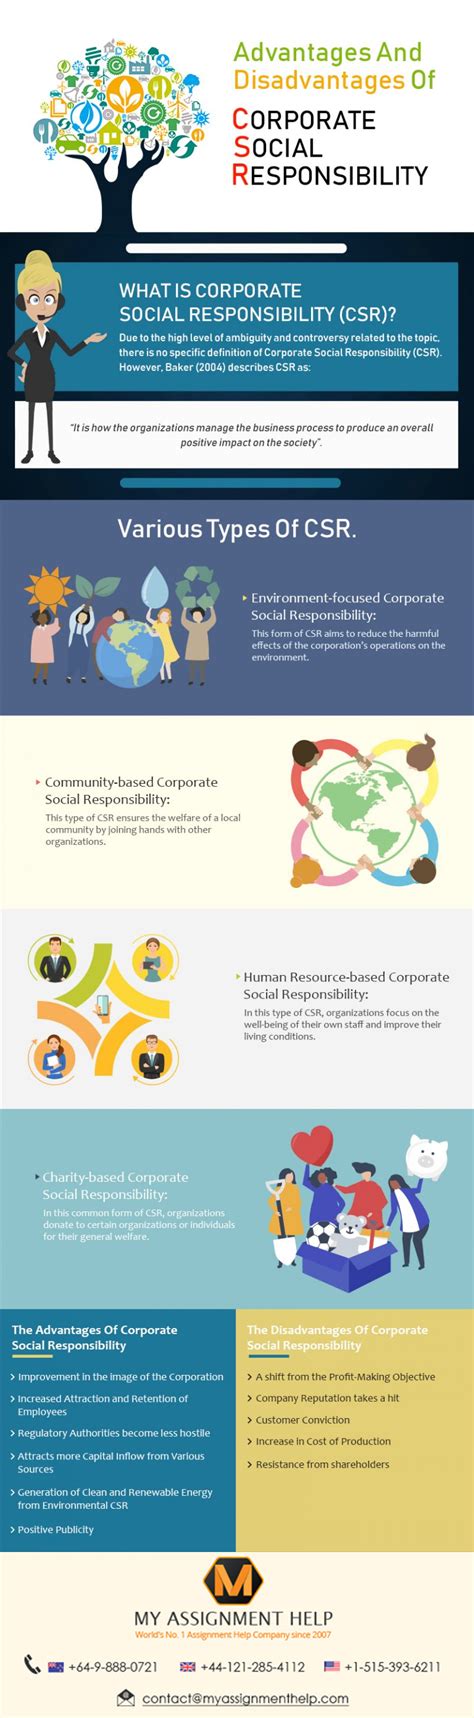 To have a greater understanding of the advantages of engaging in csr activities for your business, here are 7 benefits of corporate social responsibility initiatives for businesses CSR (Corporate Social Responsibility): Advantages and ...